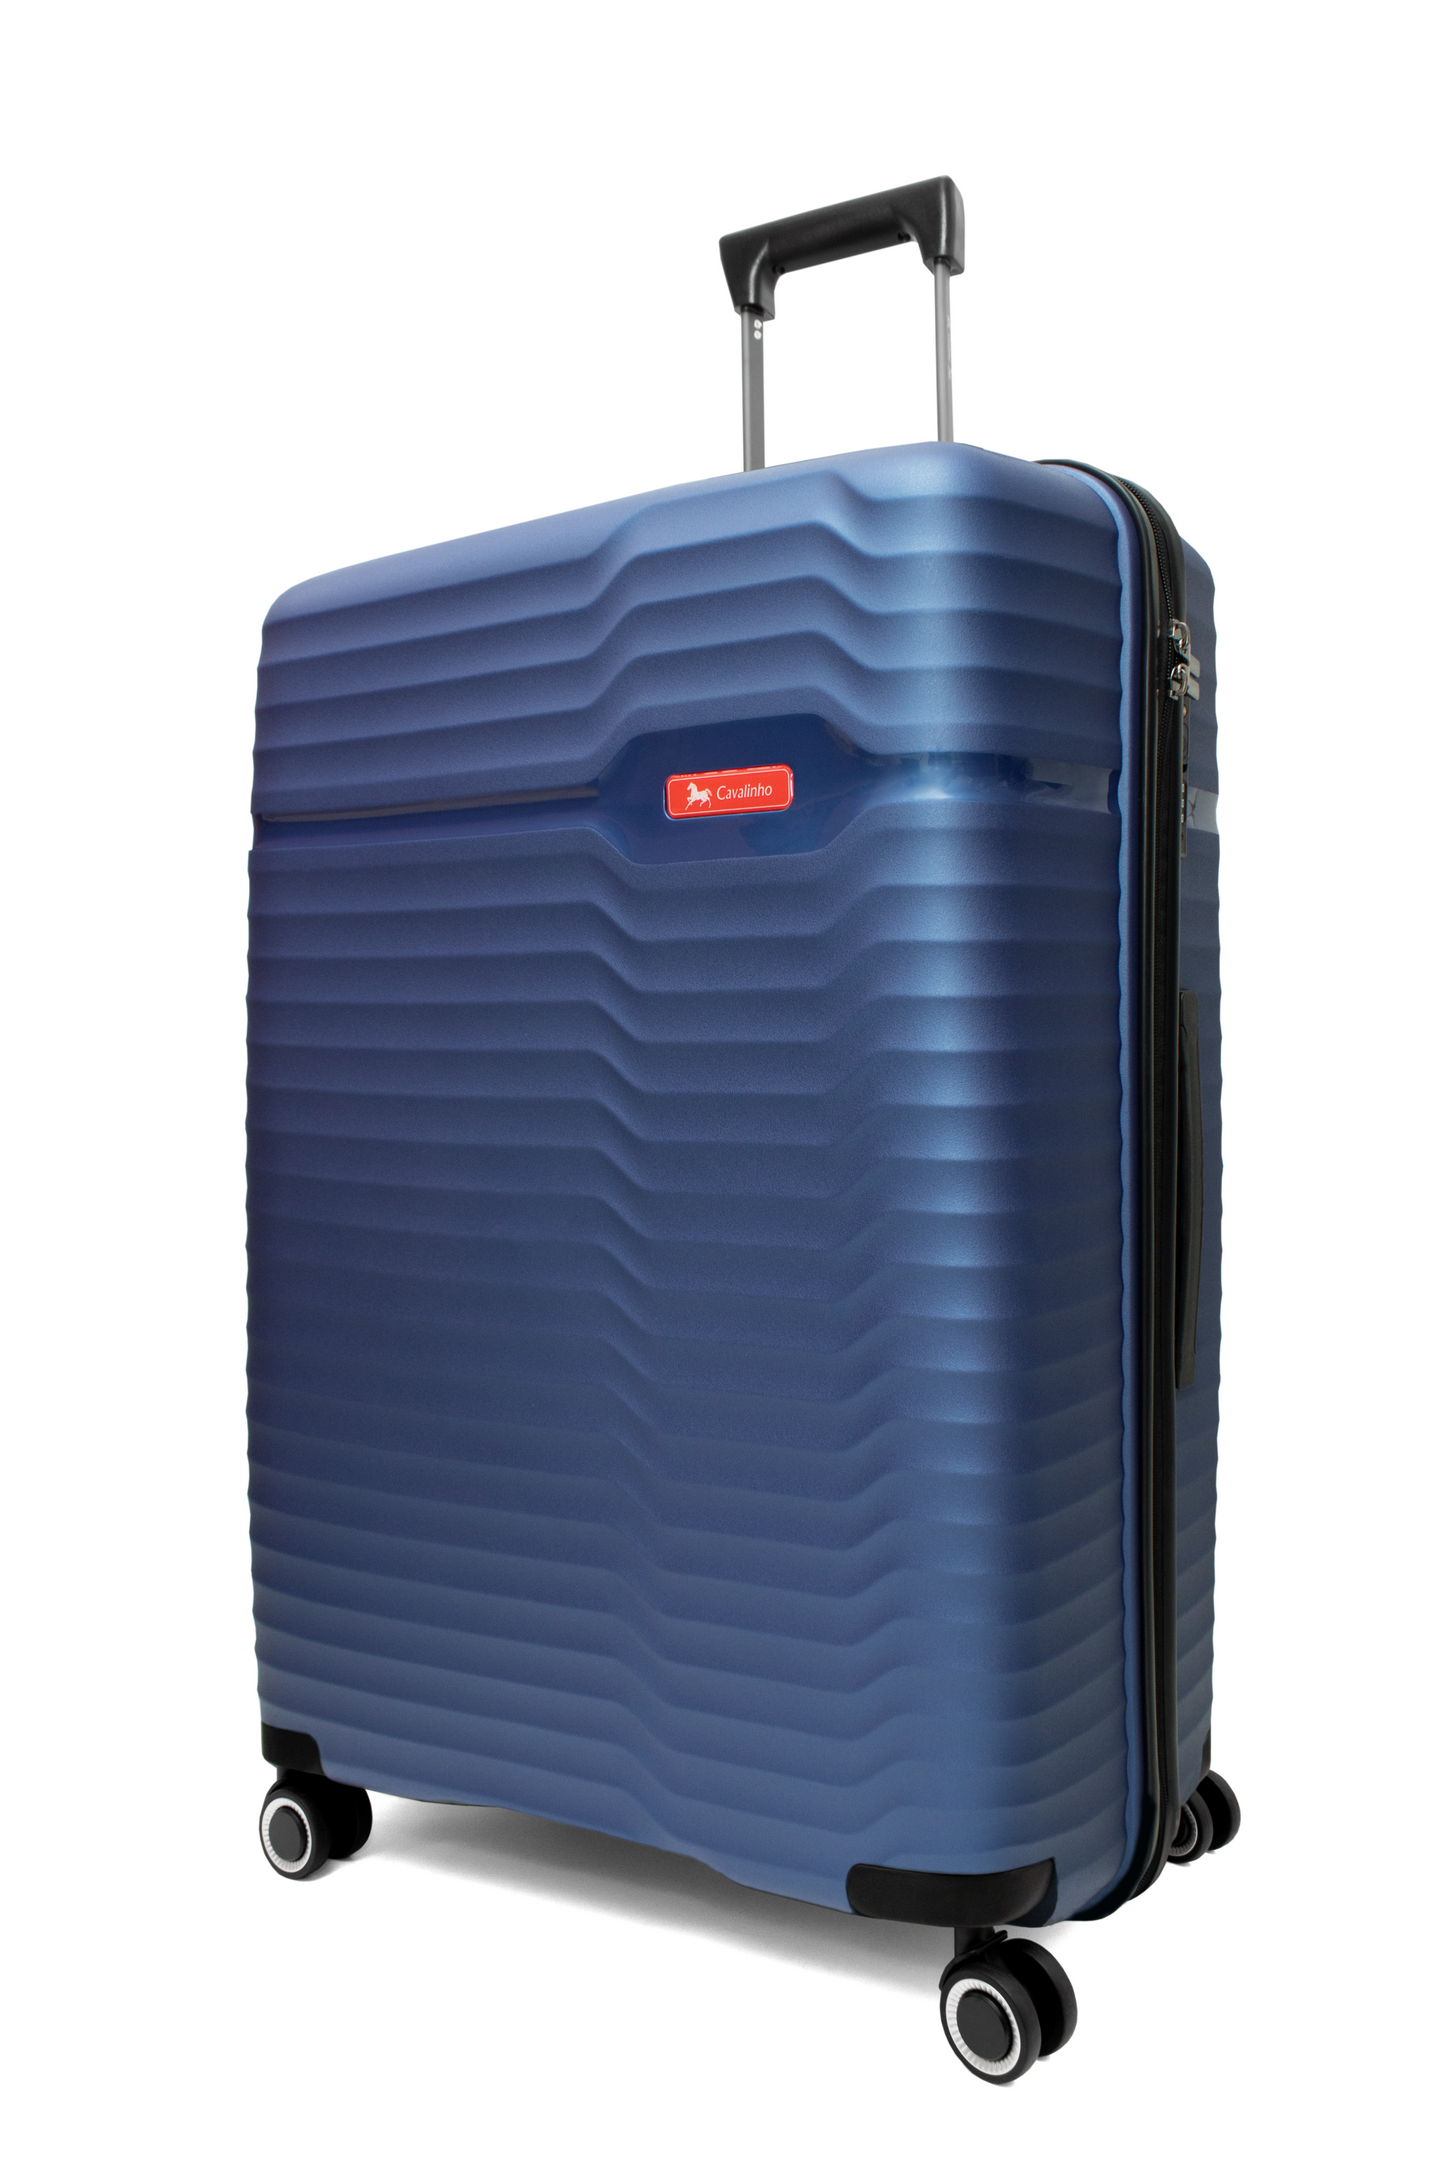 Cavalinho Check-in Hardside Luggage (24" or 28") - 28 inch SteelBlue - 68010003.03.28_2